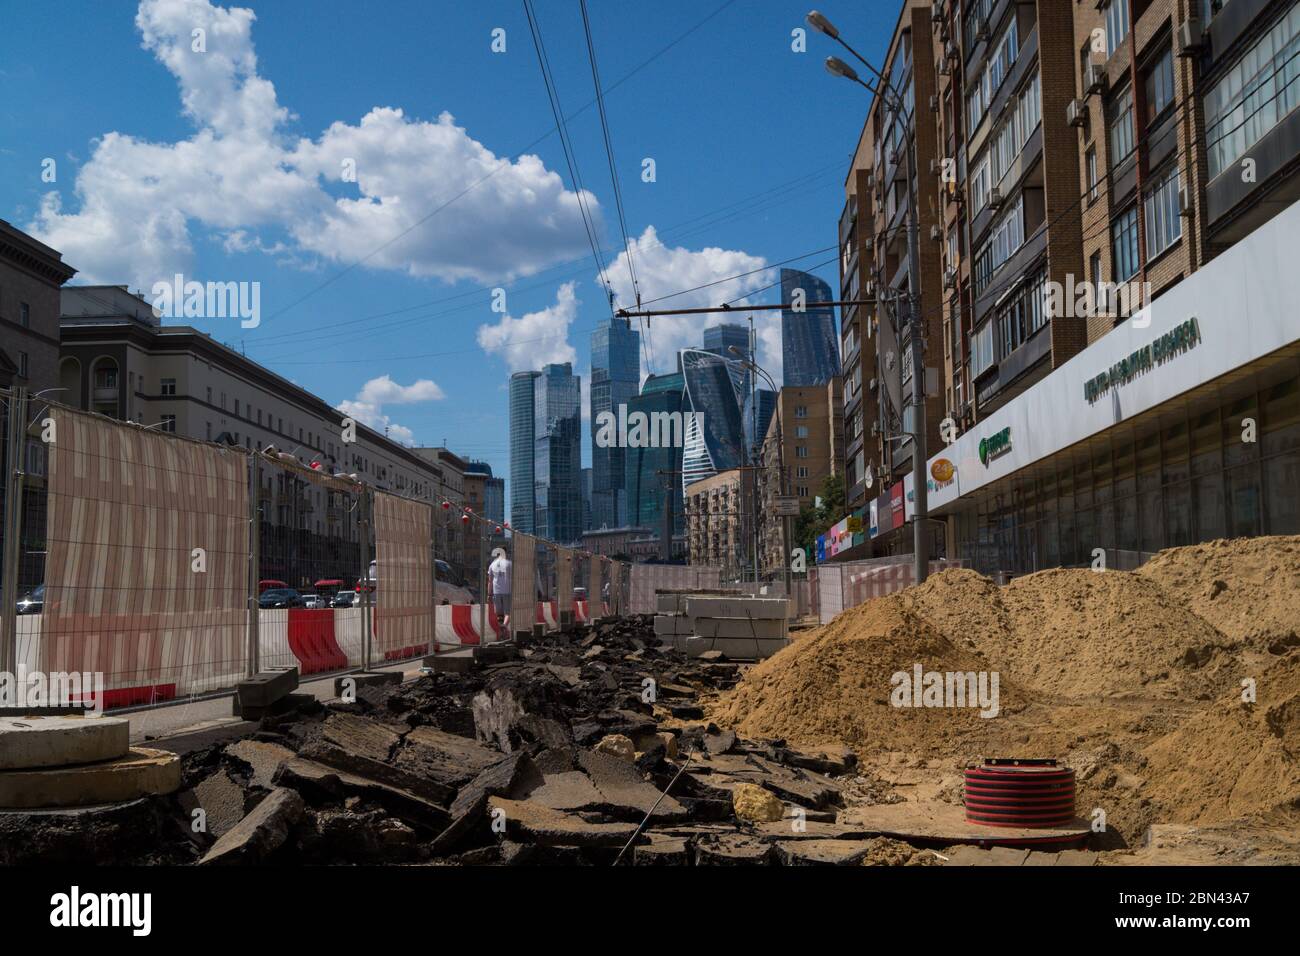 Russia, Moscow - June 3rd, 2019: Massive road construction in Moscow. Streets almost impassable for pedestrians due to excavation works. Stock Photo